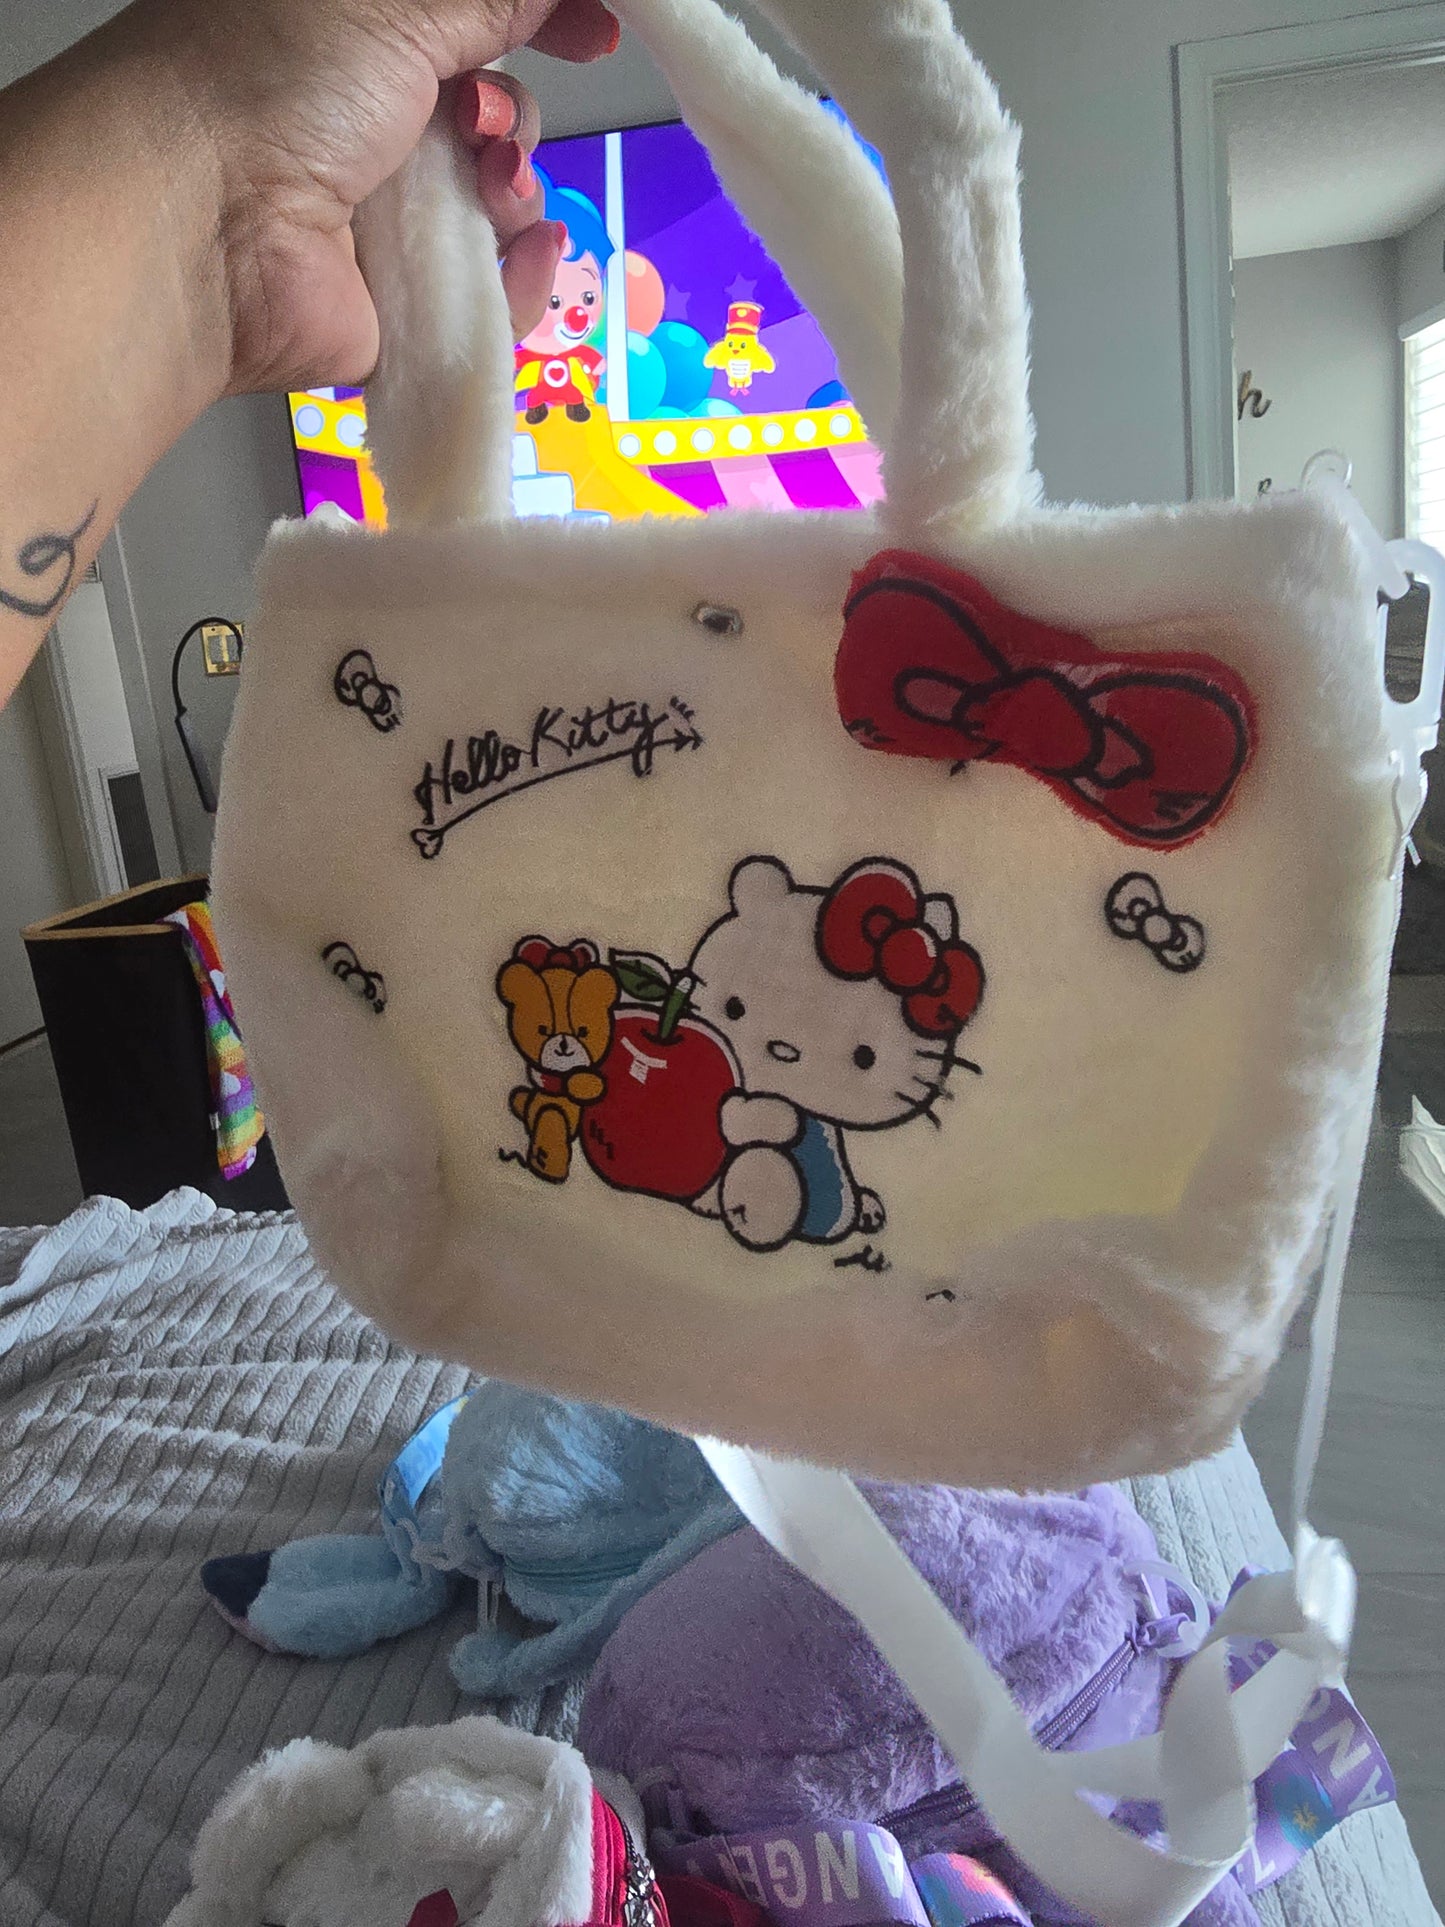 PRE-ORDER hello kitty hand bag will ship by end of May